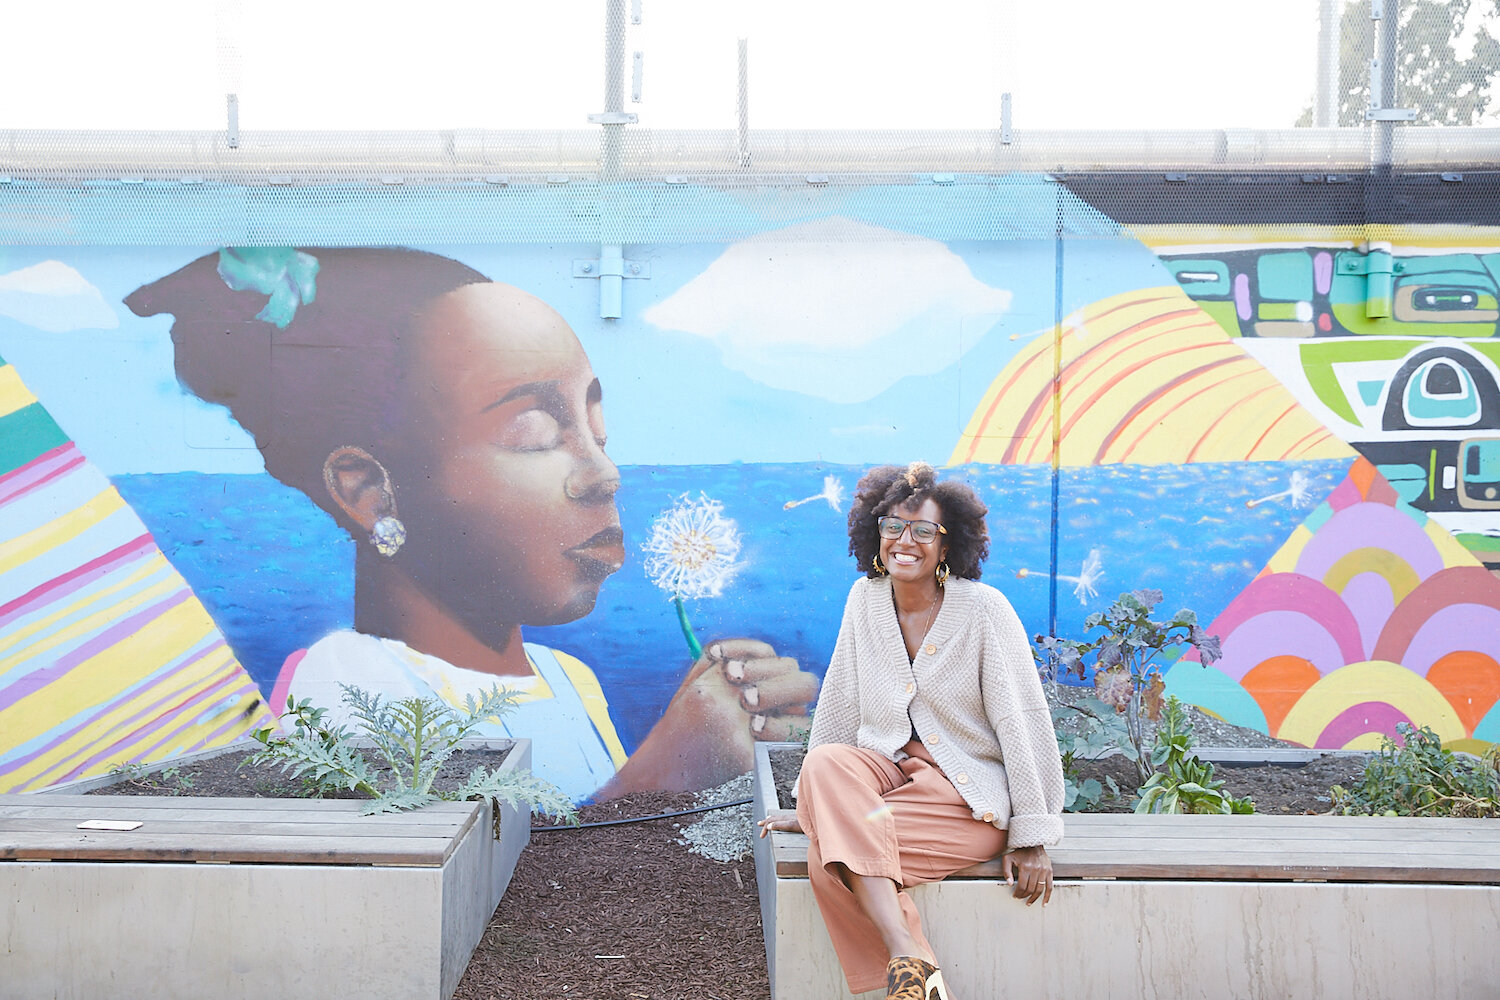 Dr. Aisha Mays, Founder, Dream Youth Clinics at Roots Community Health Center. Photographed by  Jen Siska .